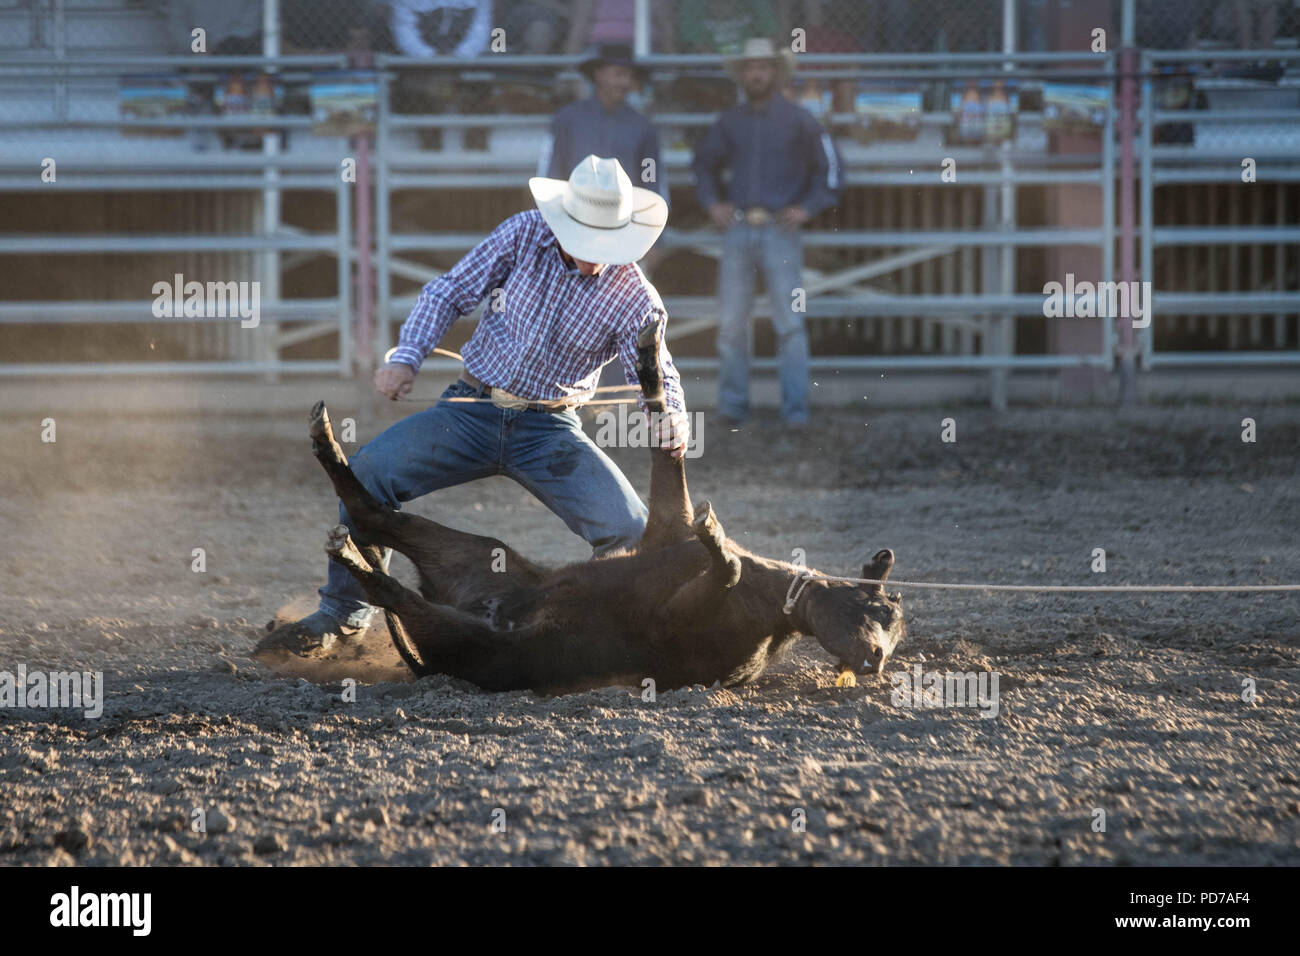 A cowboy successfully captures a calf during the tie-down competition at the 2018 Deschutes County Fair Rodeo. Stock Photo